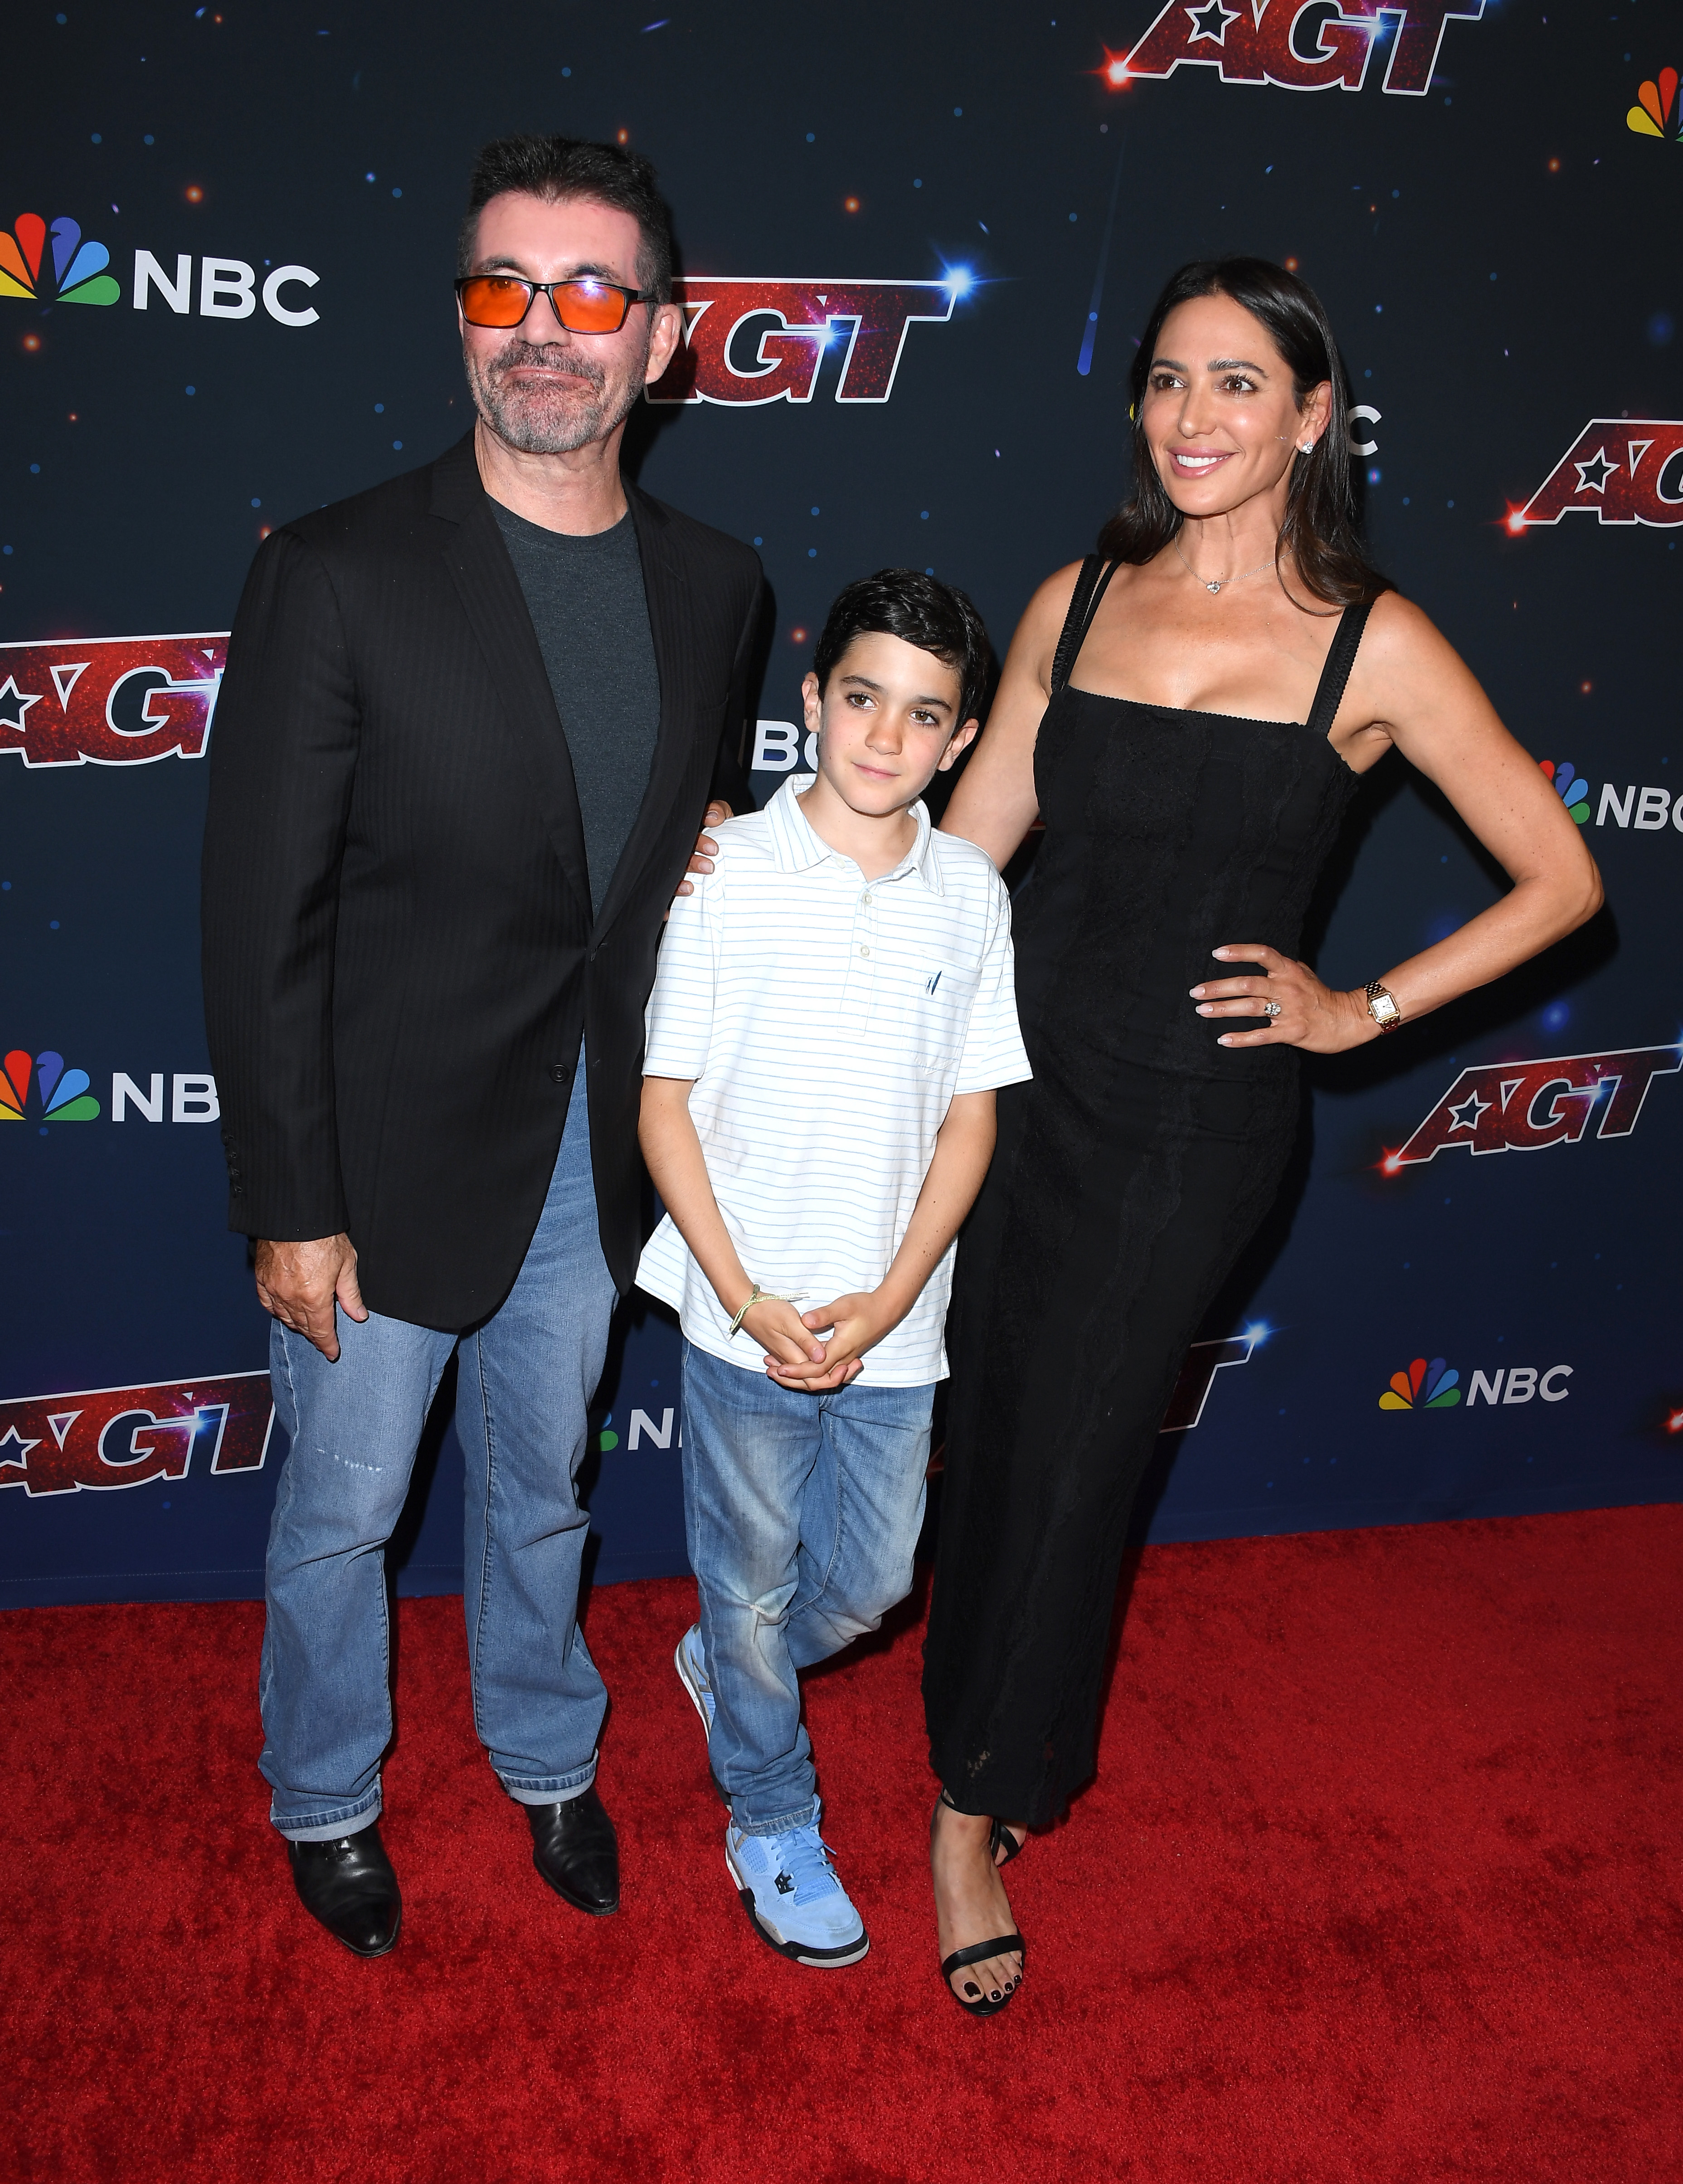 Simon and Eric Cowell with Lauren Silverman at the season 18 season finale red carpet event for "America's Got Talent" | Source: Getty Images